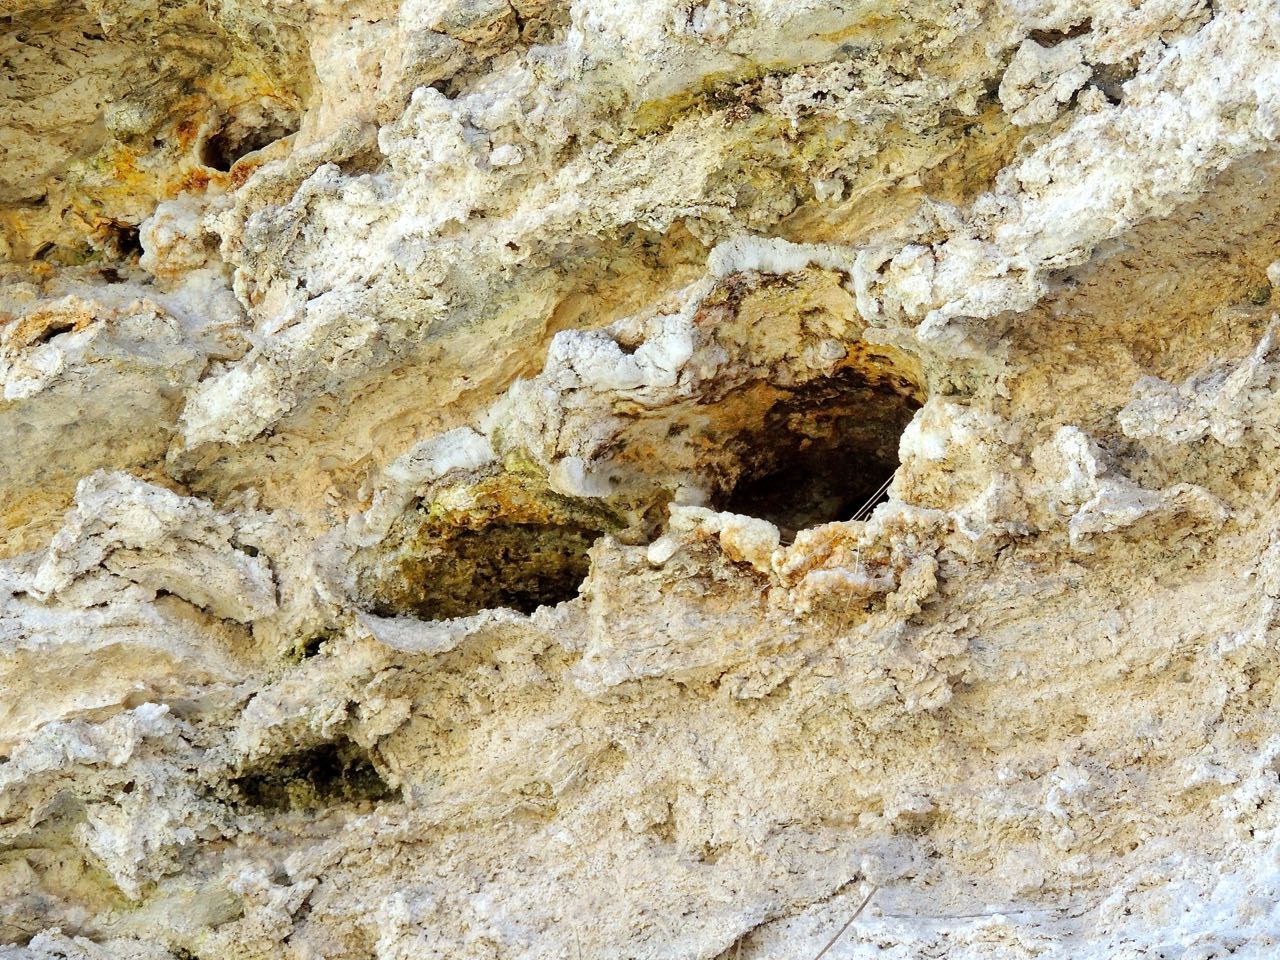 Northern Rough-winged Swallow Nests